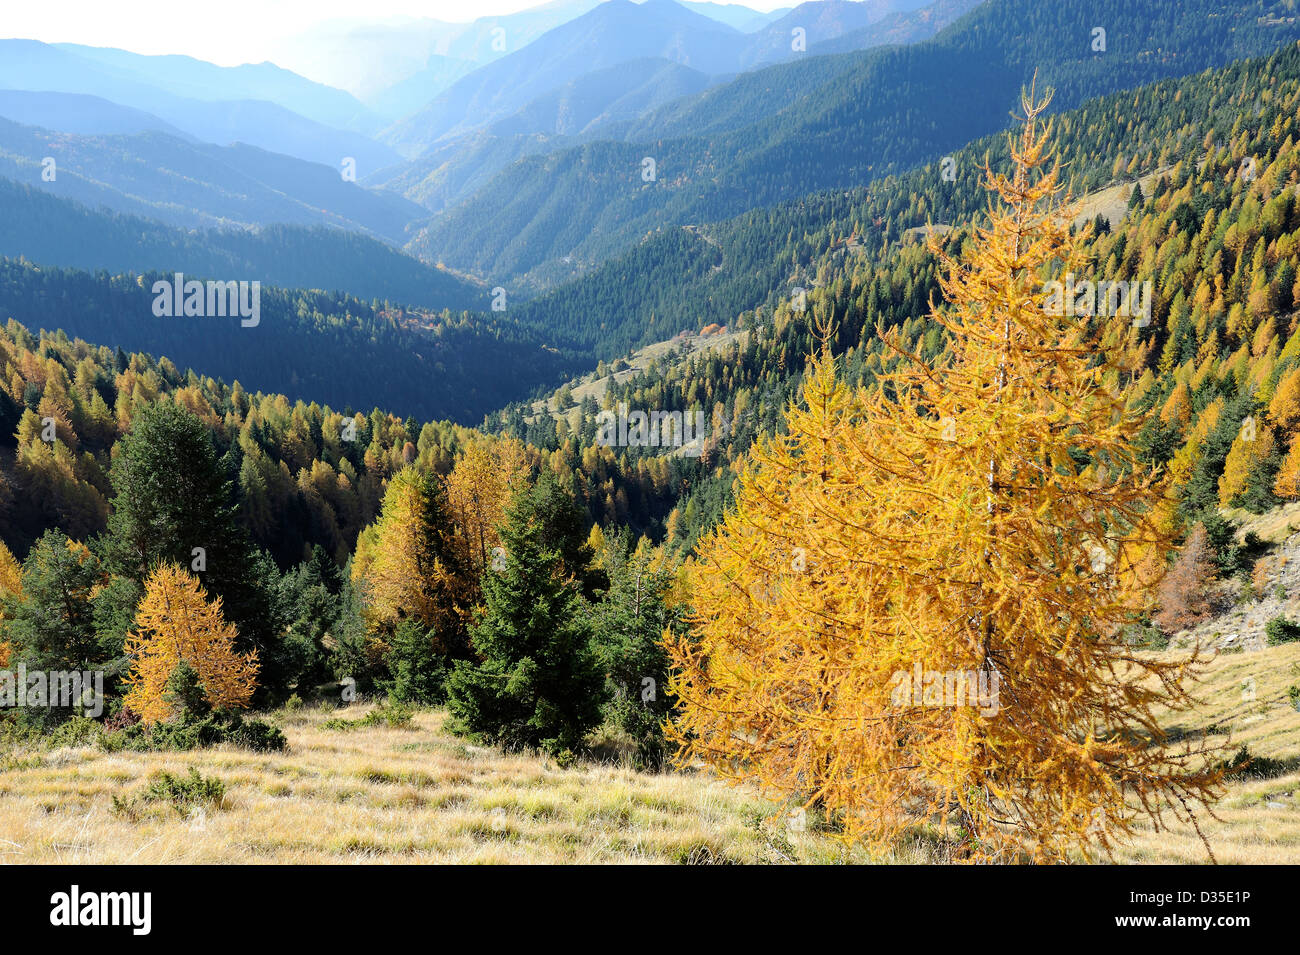 National Park of Mercantour during autumn period, pine trees changing colour in the mountains, Alpes Maritimes, France Stock Photo